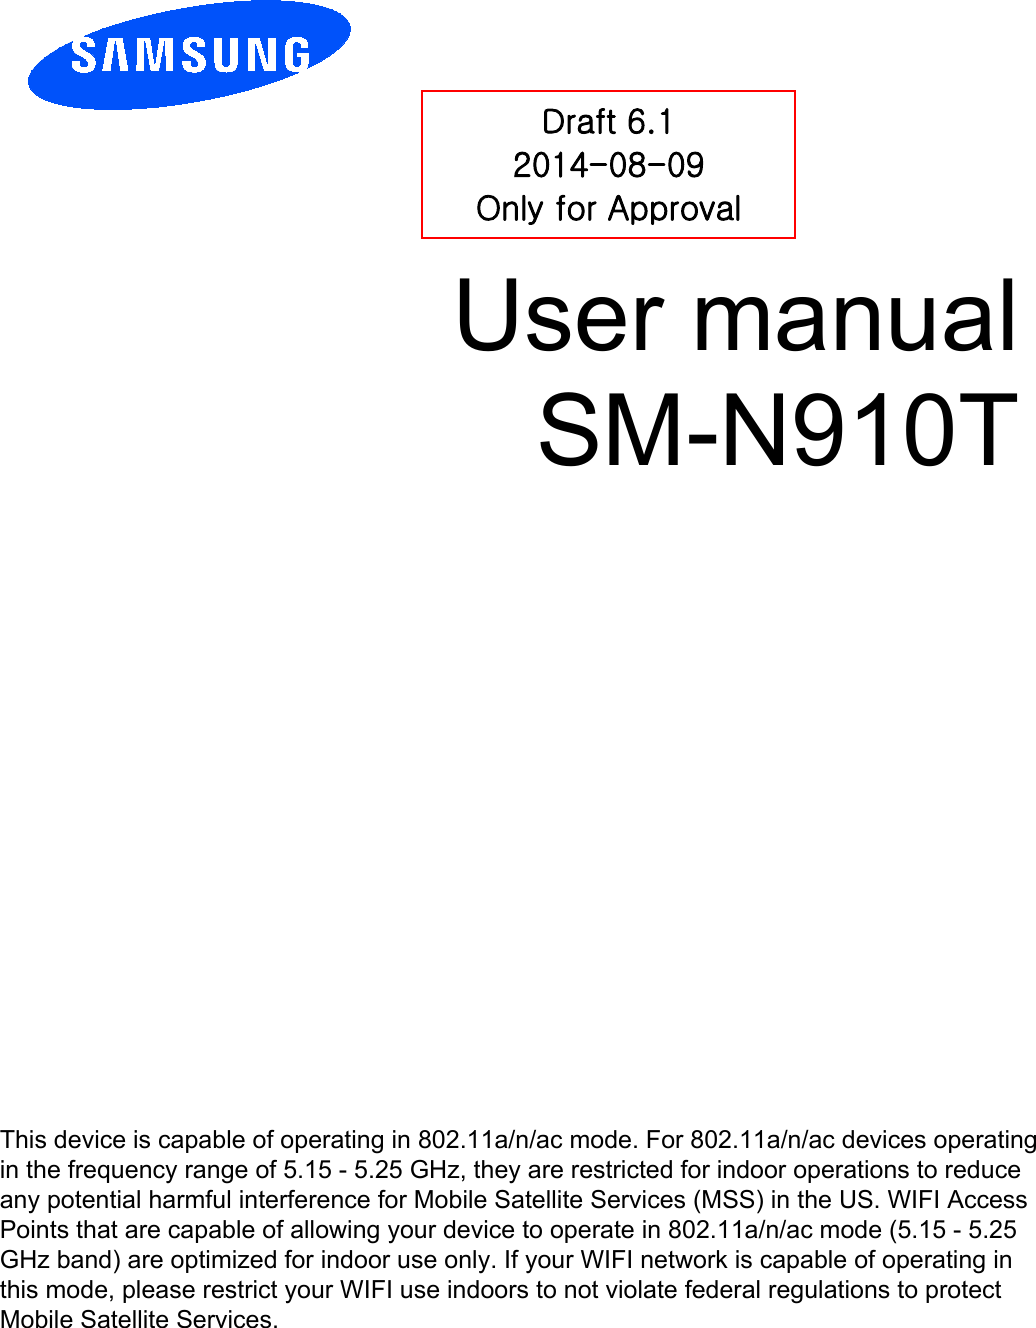 User manual SM-N910T Draft 6.1 2014-08-09 Only for Approval This device is capable of operating in 802.11a/n/ac mode. For 802.11a/n/ac devices operating in the frequency range of 5.15 - 5.25 GHz, they are restricted for indoor operations to reduce any potential harmful interference for Mobile Satellite Services (MSS) in the US. WIFI Access Points that are capable of allowing your device to operate in 802.11a/n/ac mode (5.15 - 5.25 GHz band) are optimized for indoor use only. If your WIFI network is capable of operating in this mode, please restrict your WIFI use indoors to not violate federal regulations to protect Mobile Satellite Services. 